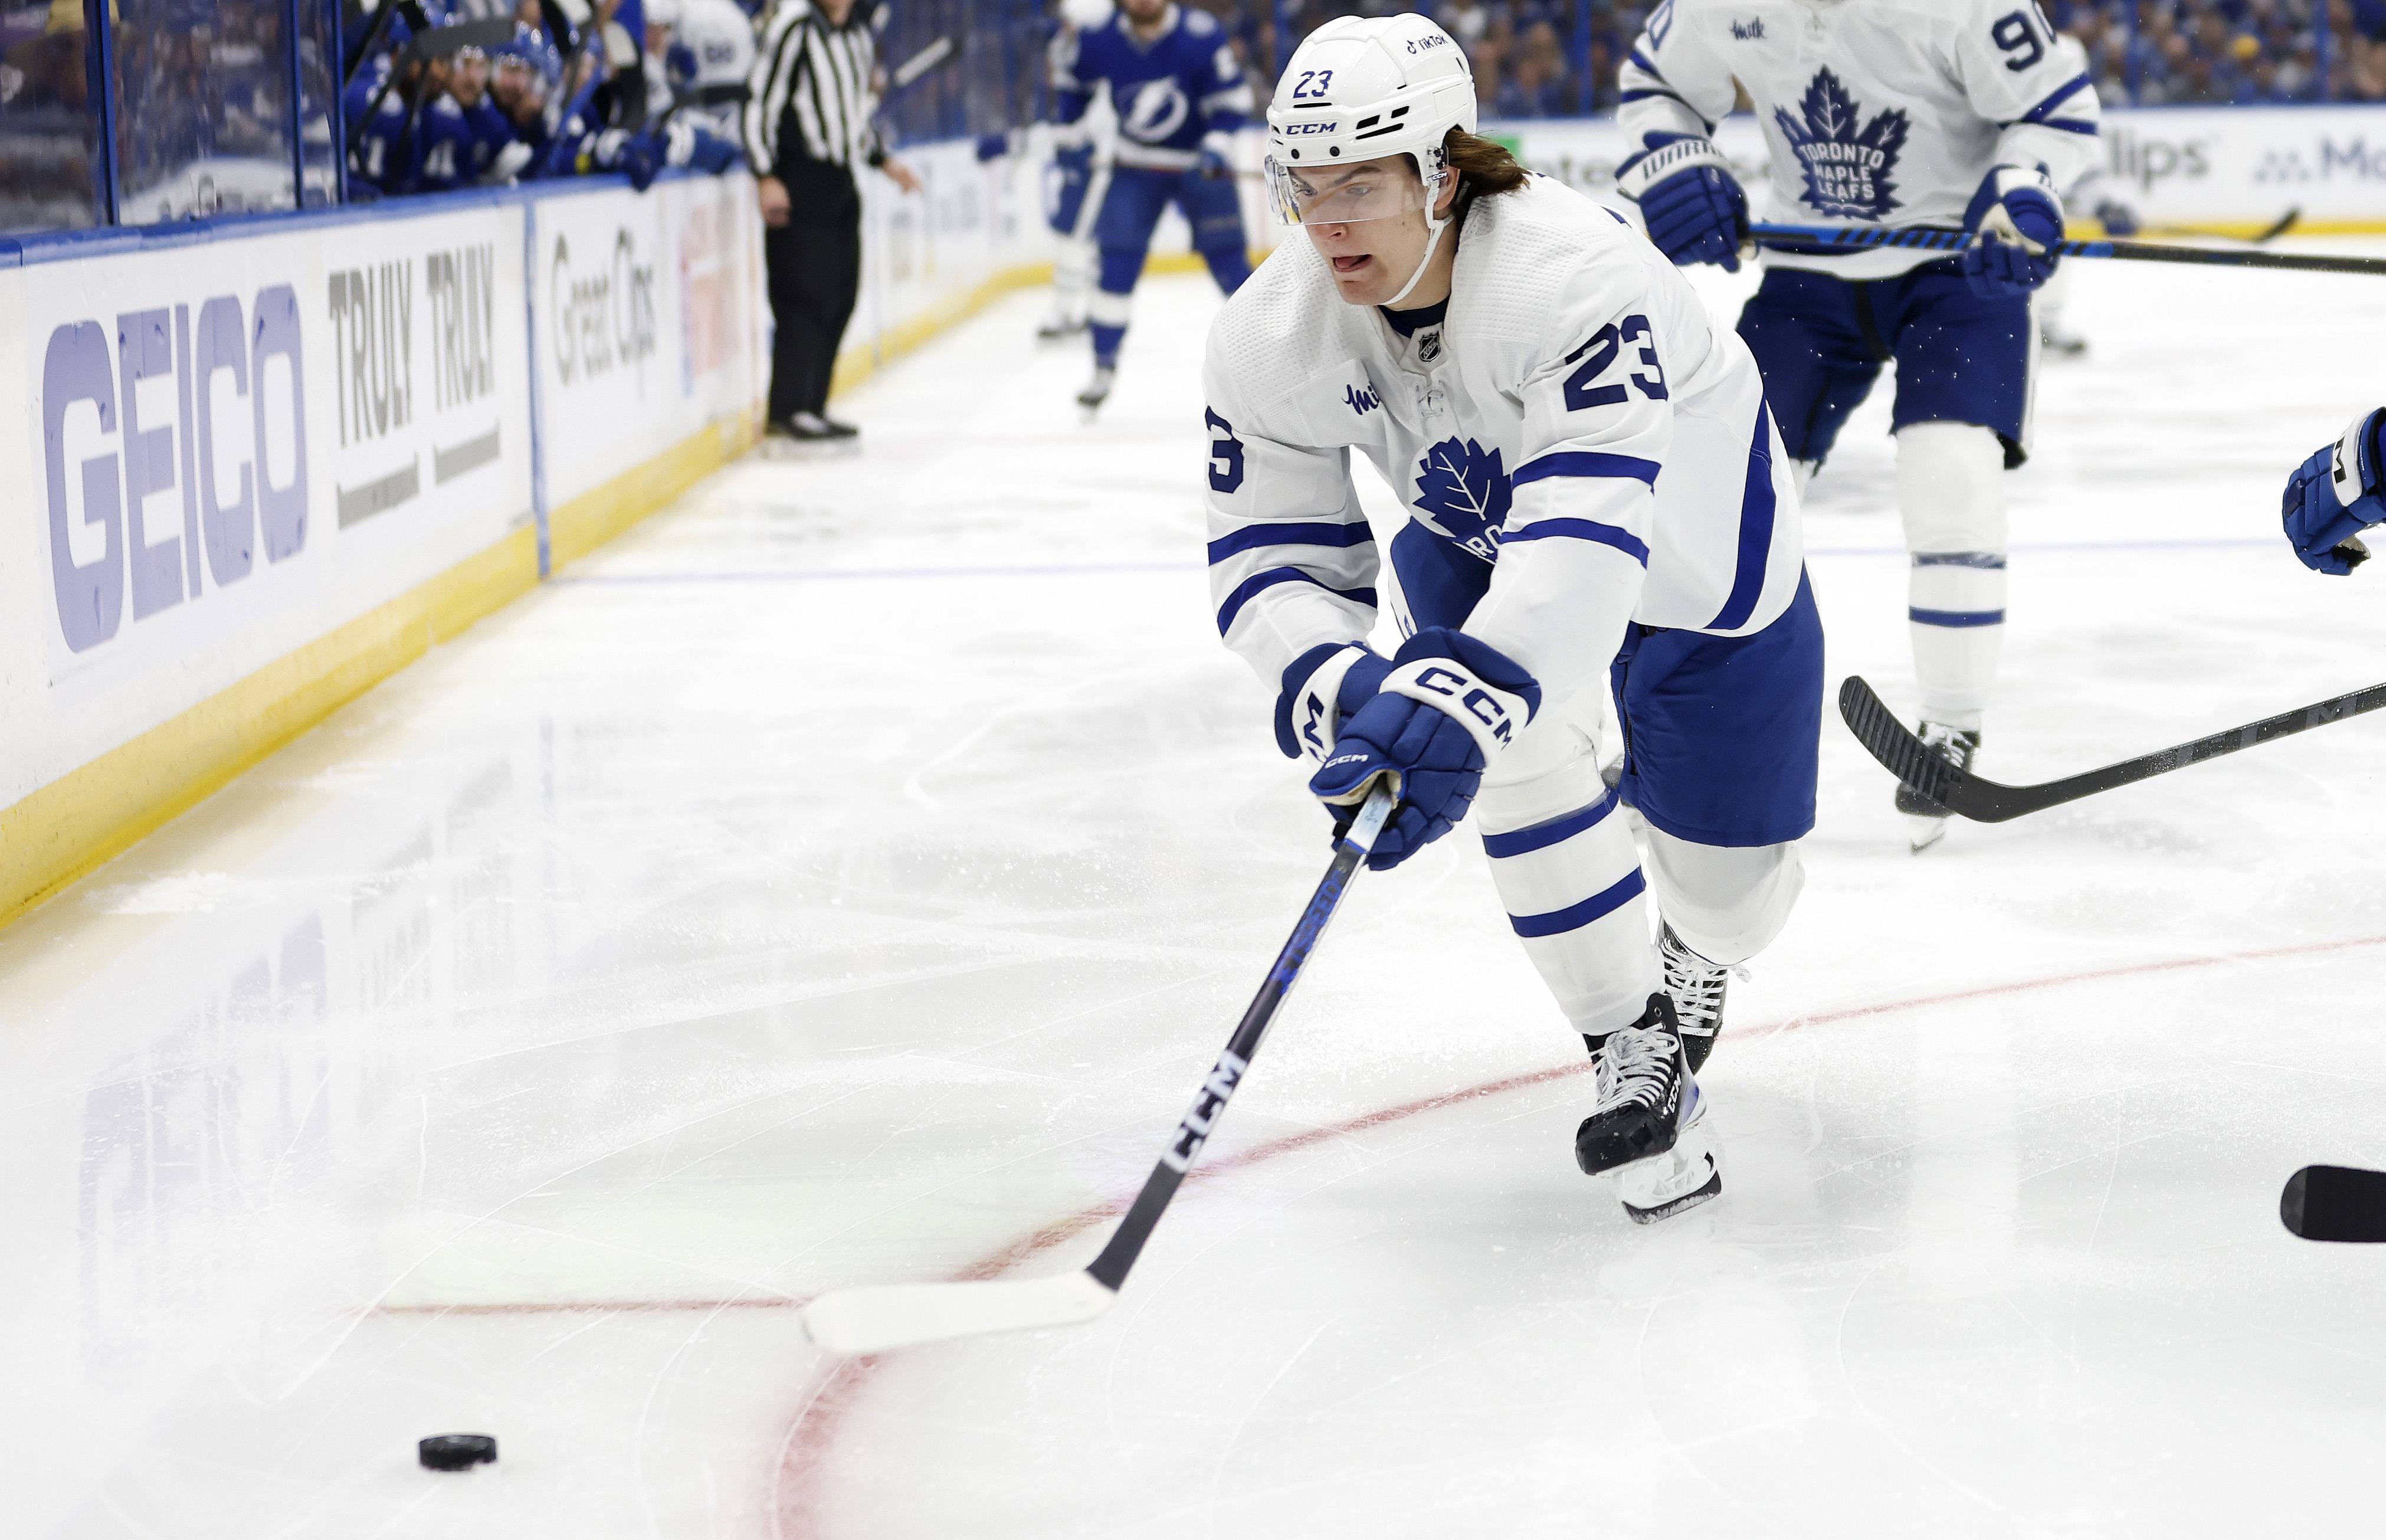 Maple Leafs-Lightning playoff rematch locked in after Toronto